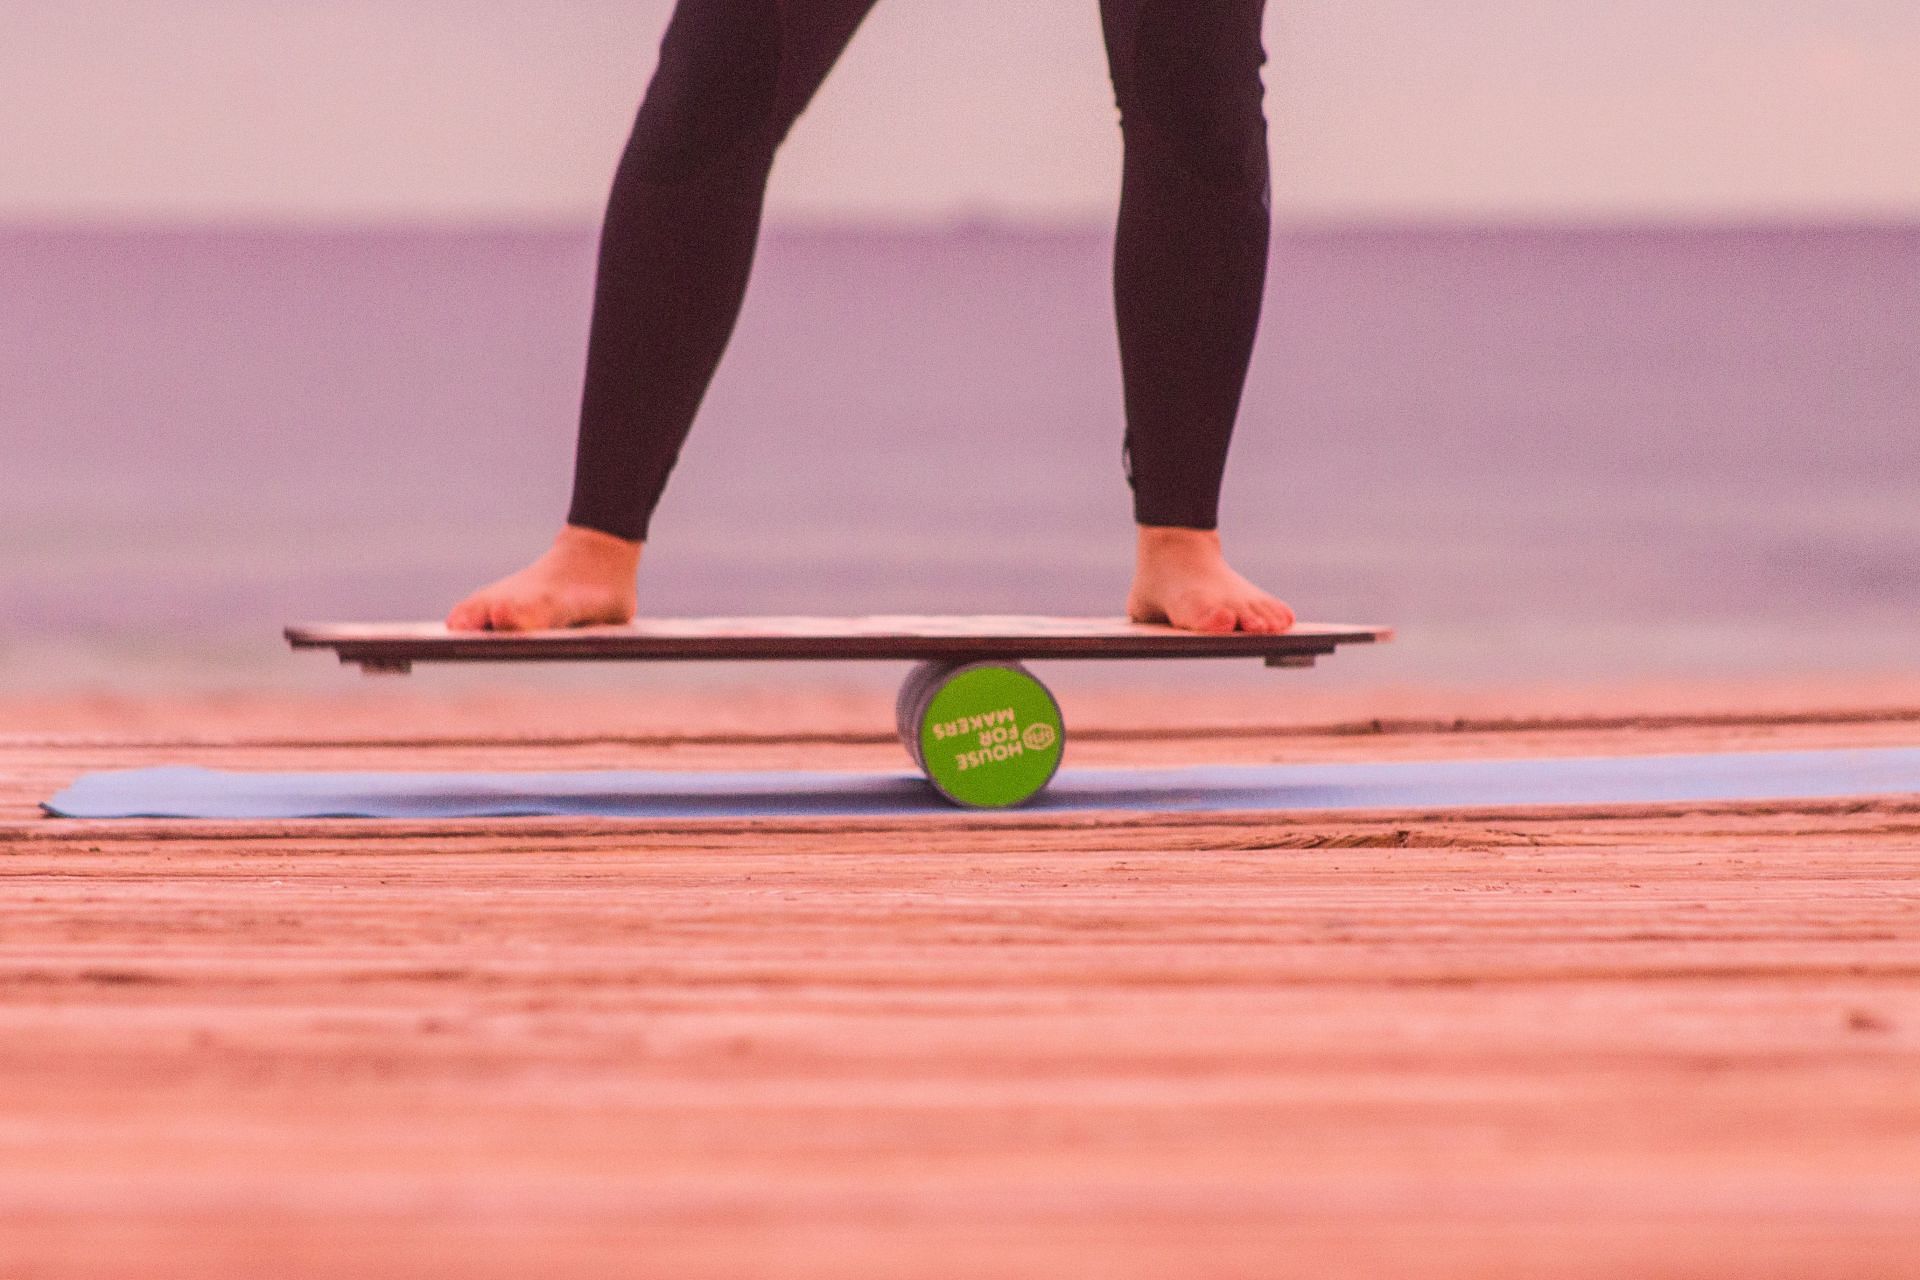 Balance board exercises are a great way to strengthen your core. (Image via Unsplash / Gustavo Torres)